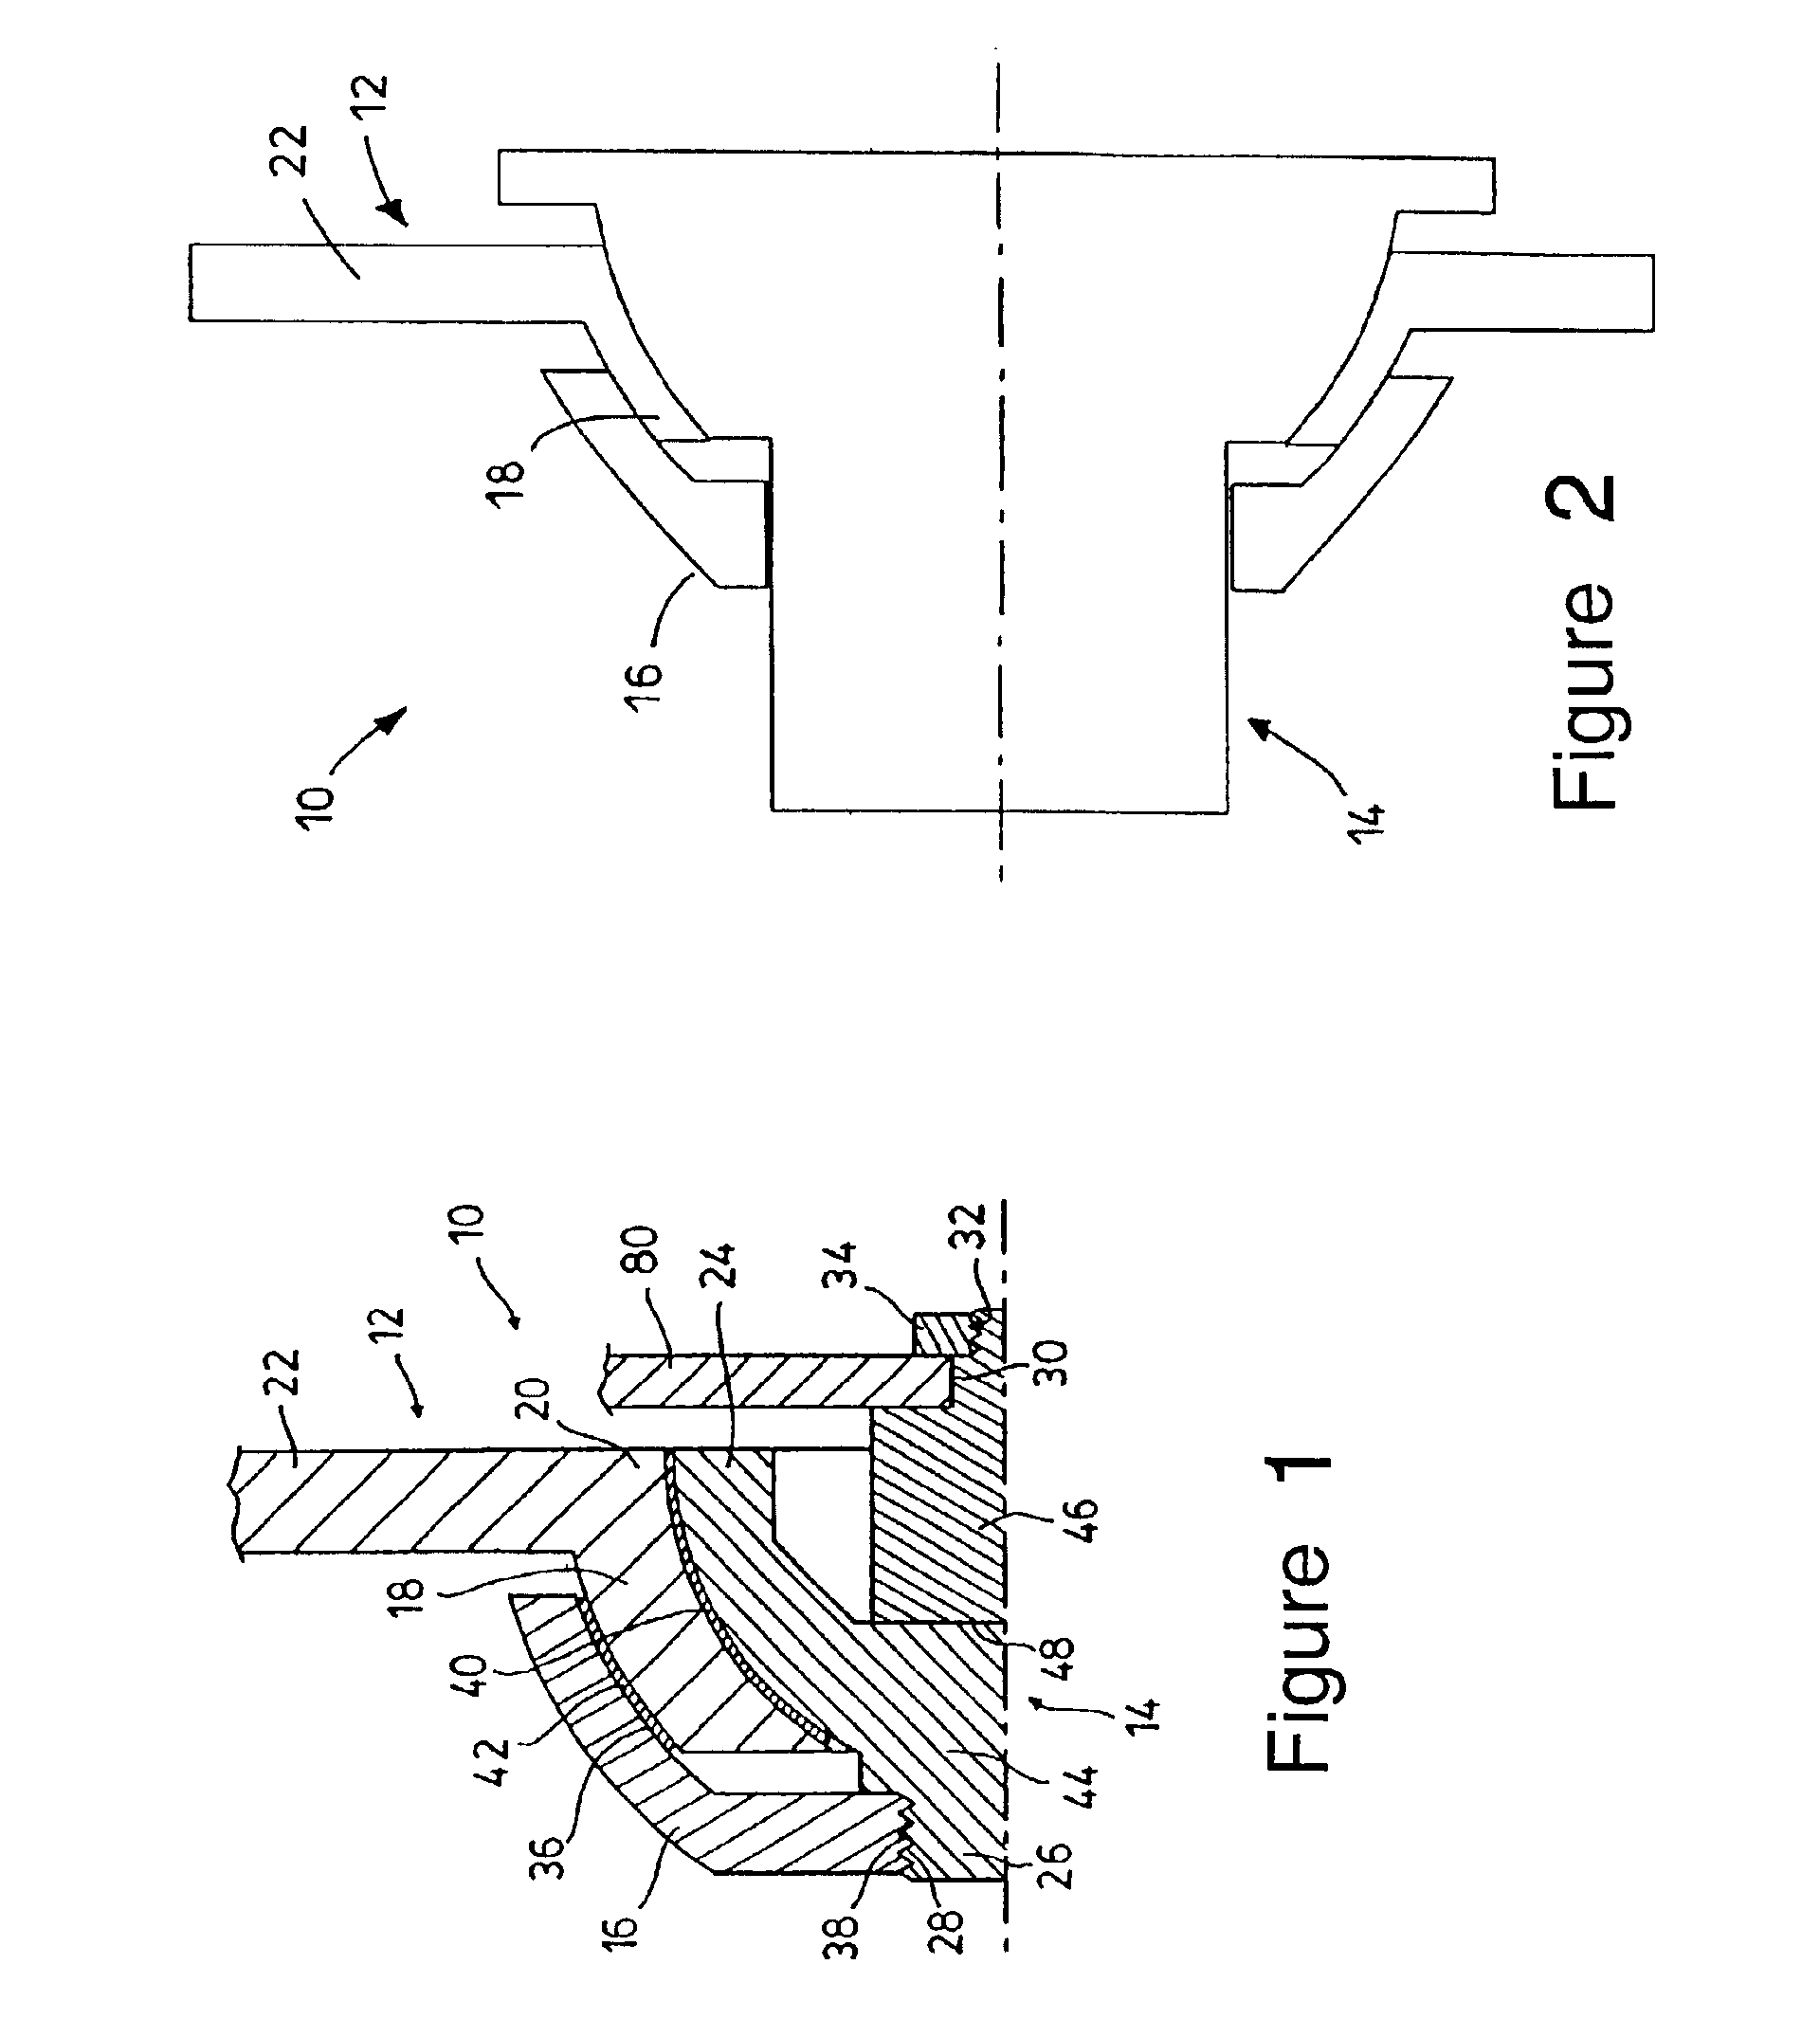 Measurement device and seating arrangement